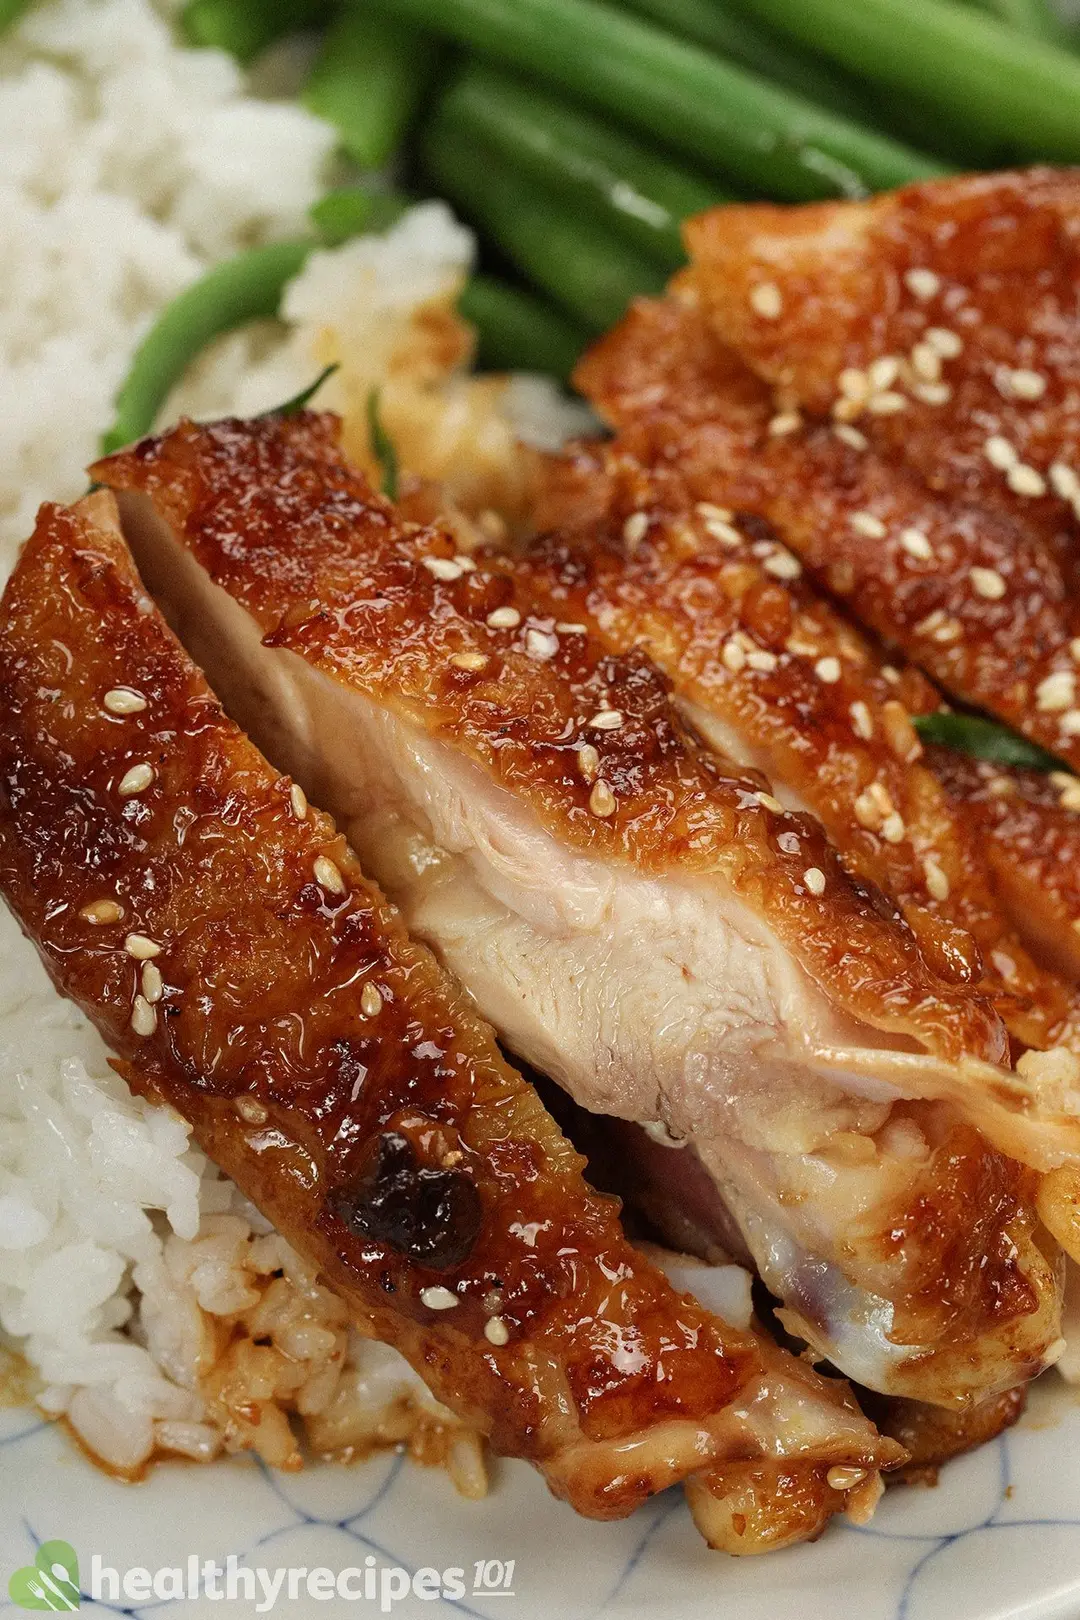 A close-up shot of cooked brown chicken thighs covered in a glossy sauce and white sesame seeds, laid on white rice